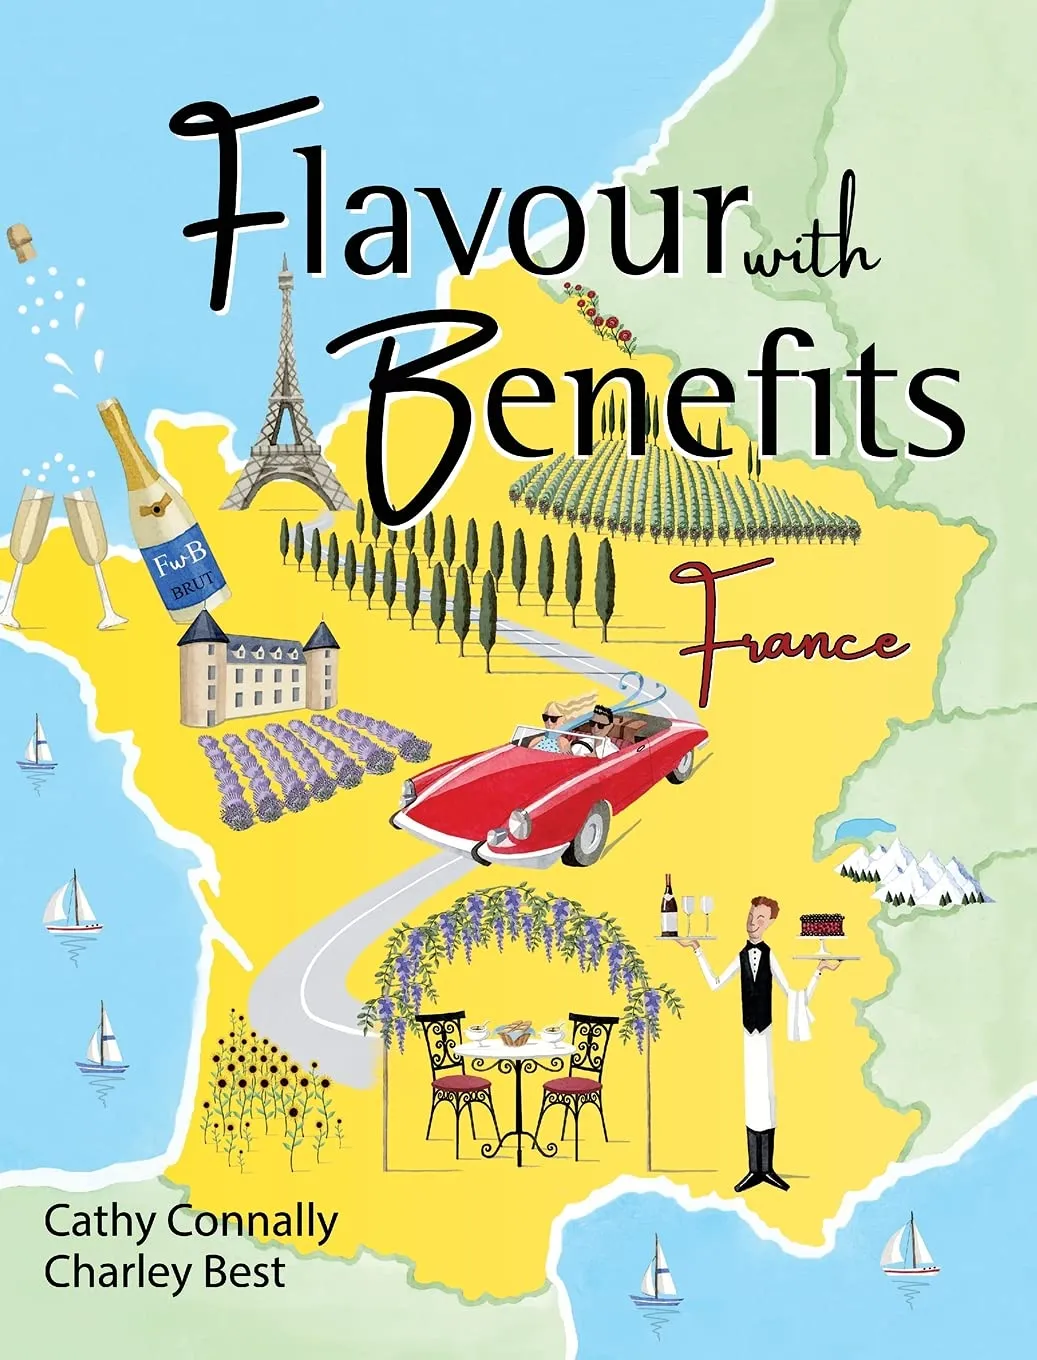 favour with benefits, grand cru gourmet,